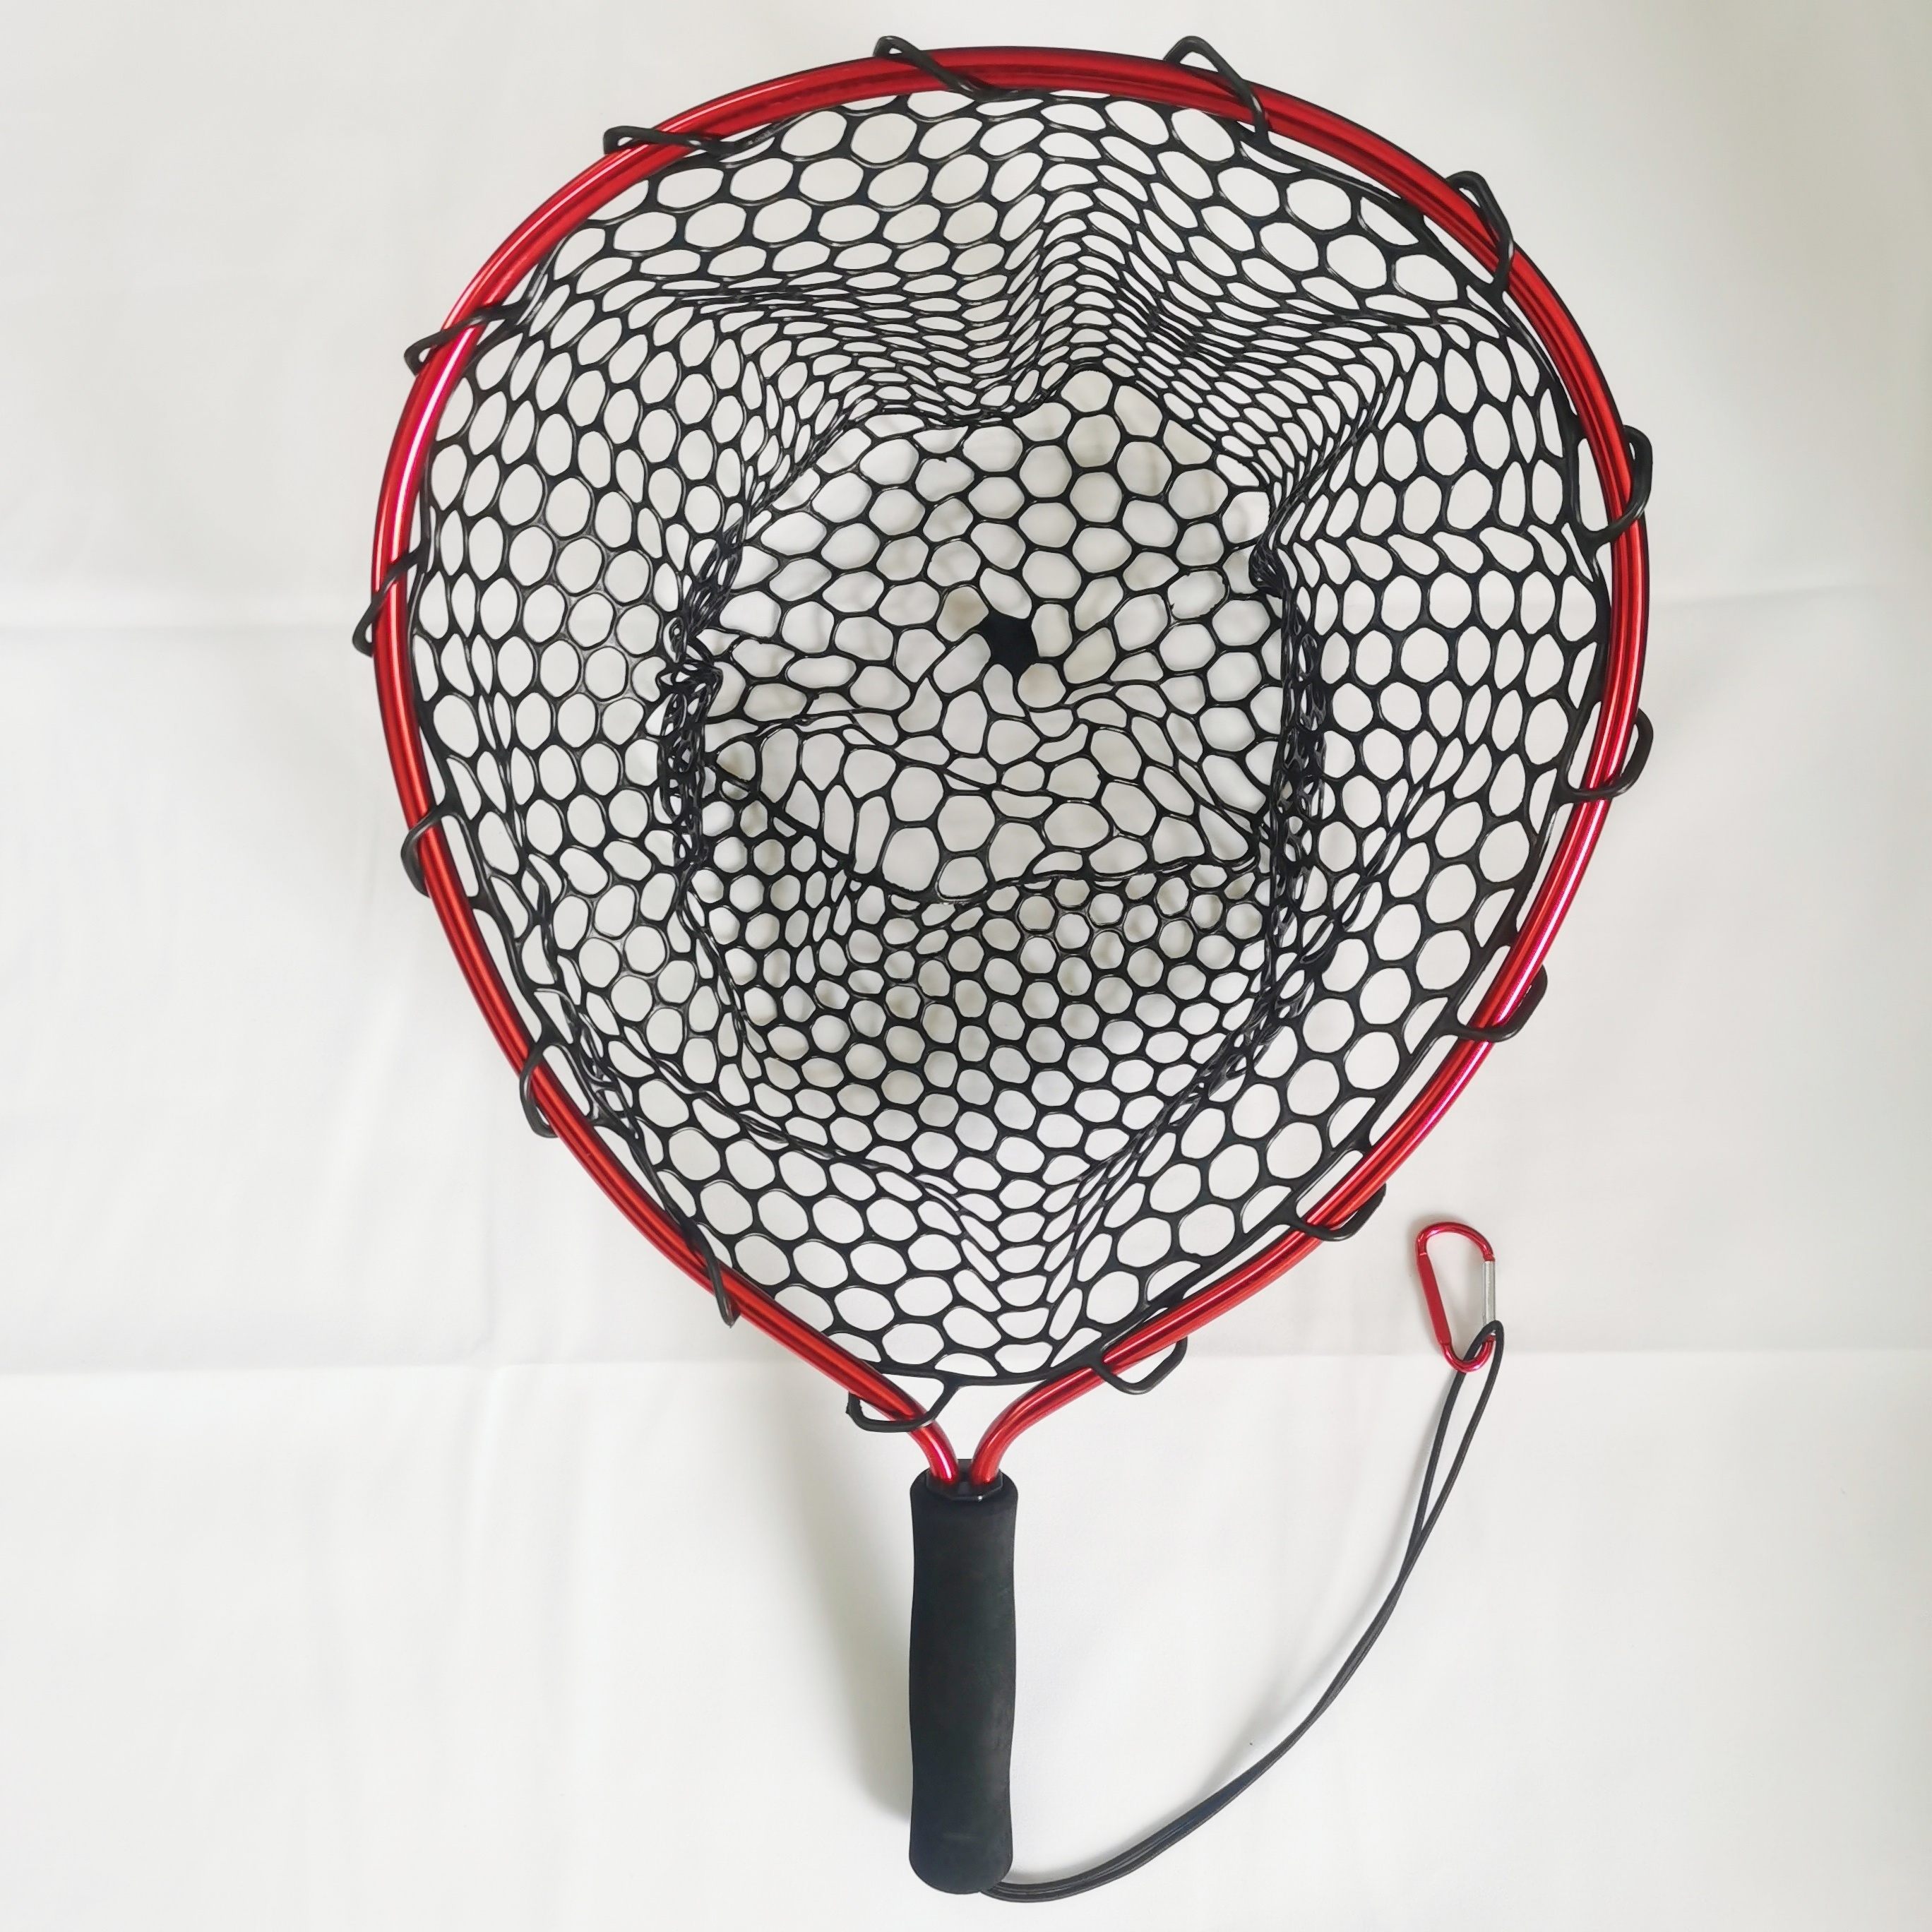 

Durable Ultralight Aluminum Alloy Fly Fishing Landing Net - Perfect For Anglers!